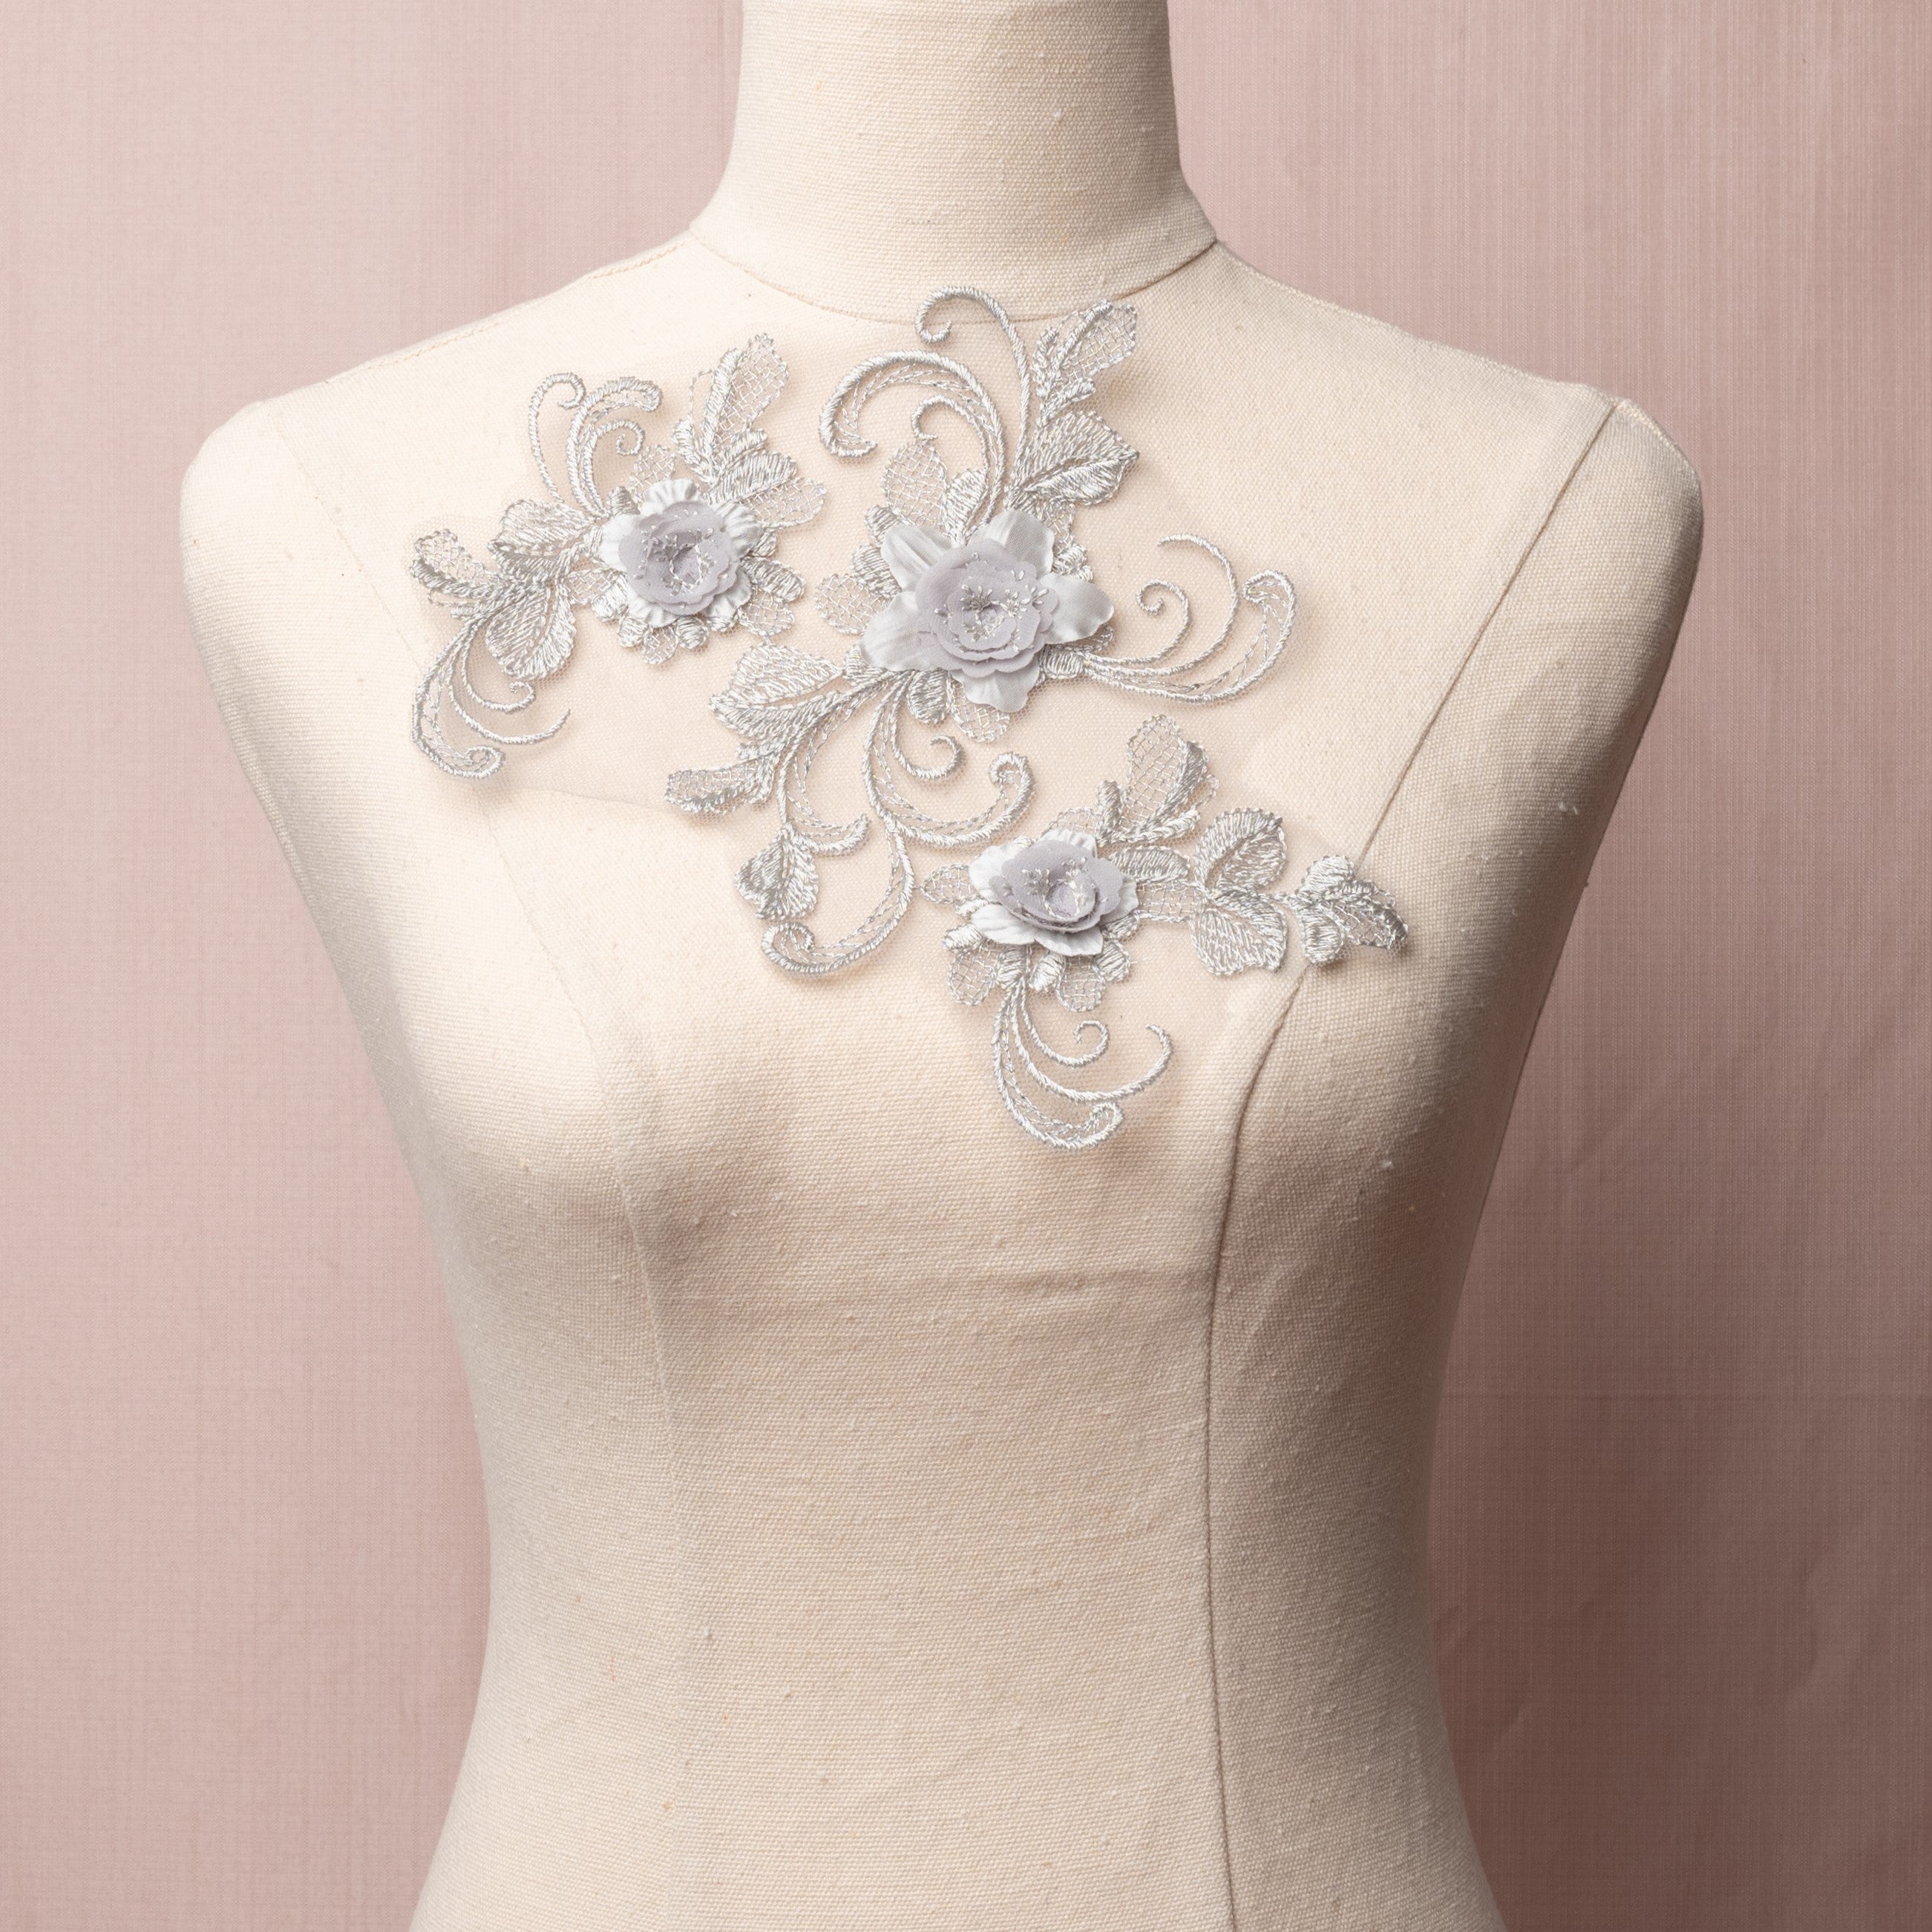 Single grey lace applique with an open romantic design of swirling stems, cross hatched leaves and 3D rose like flowers.  The applique is displayed on a mannequin. 